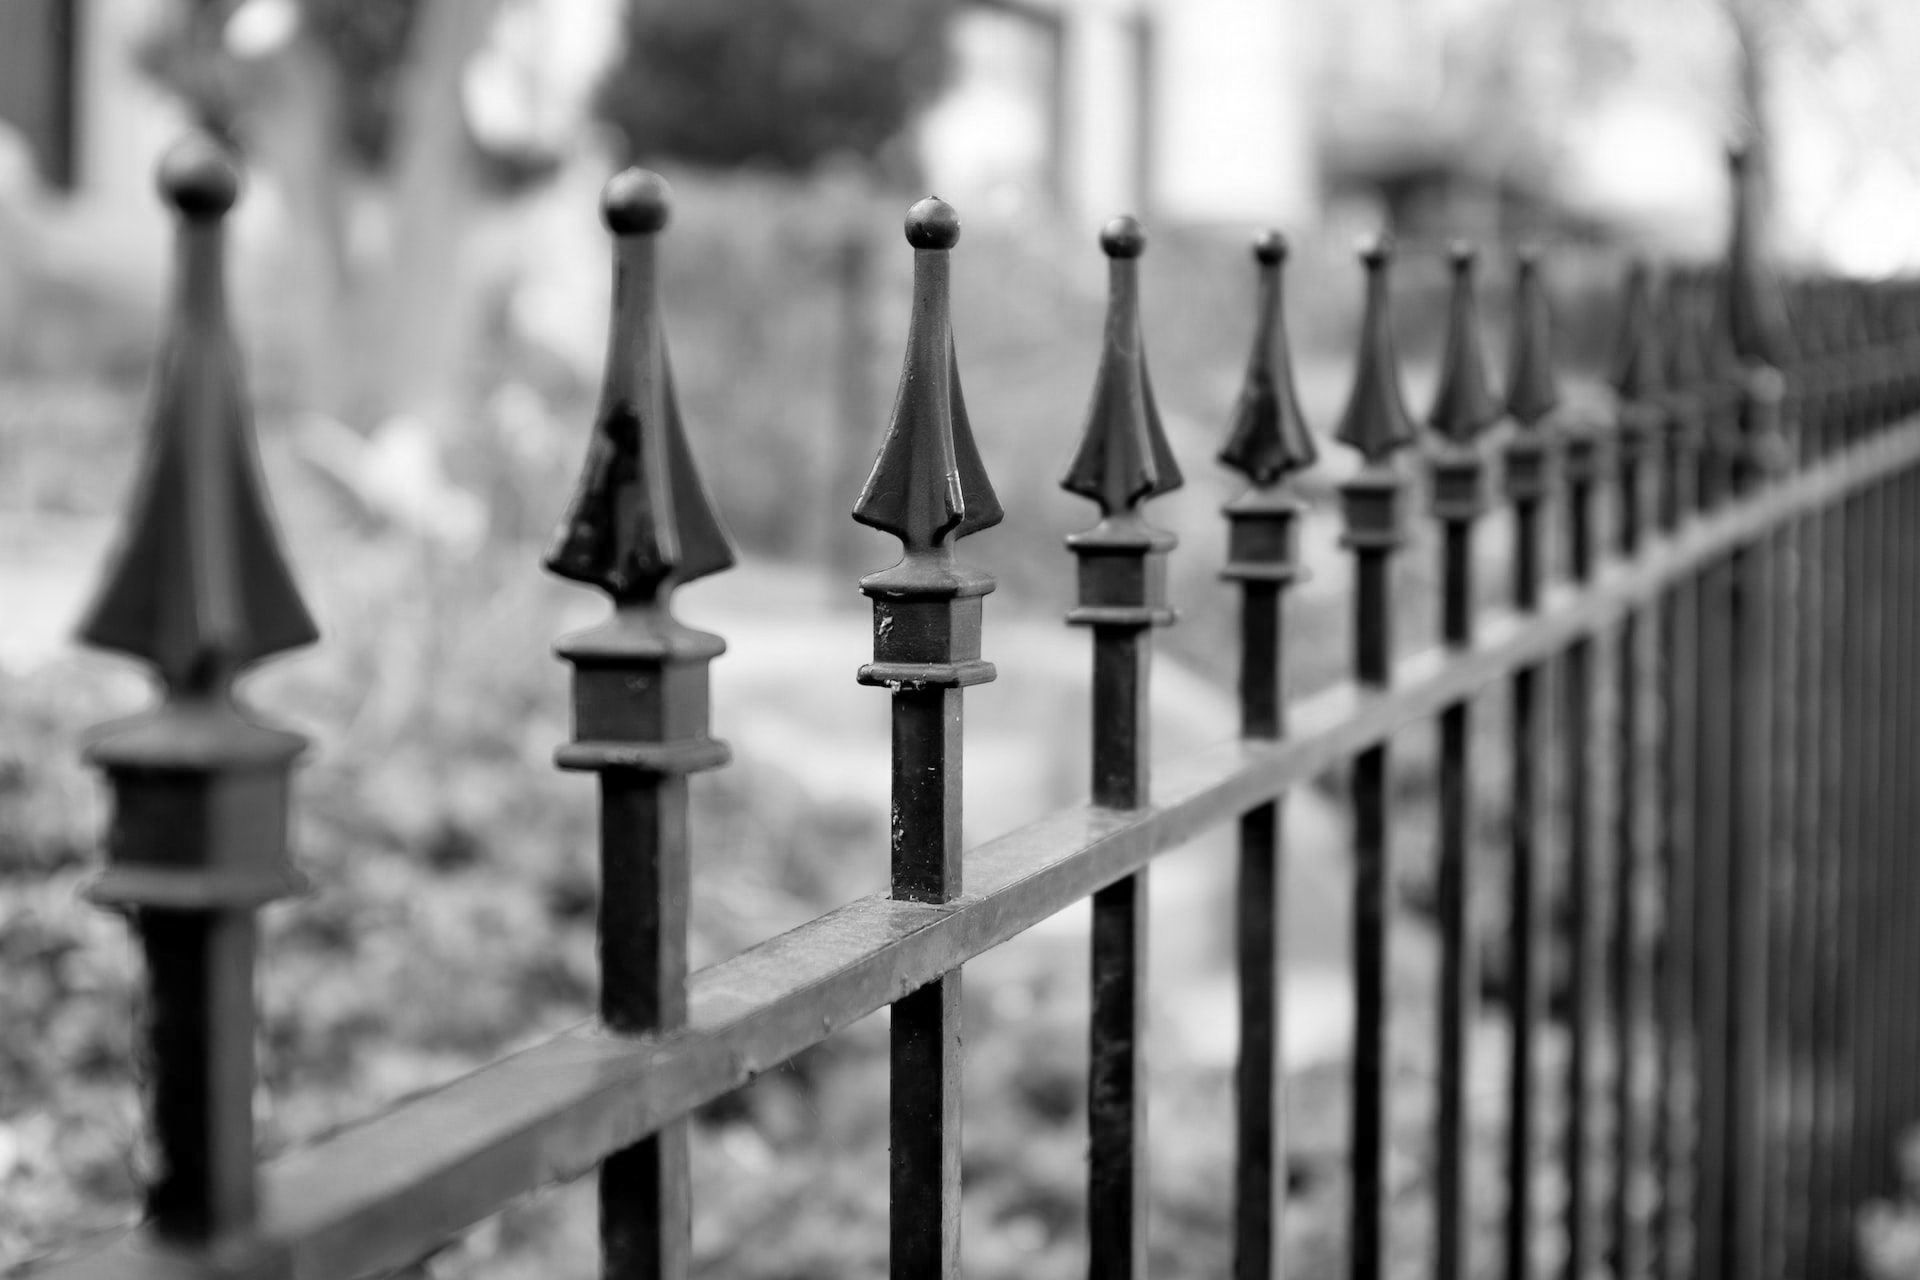 A wrought iron fence in front of a garden